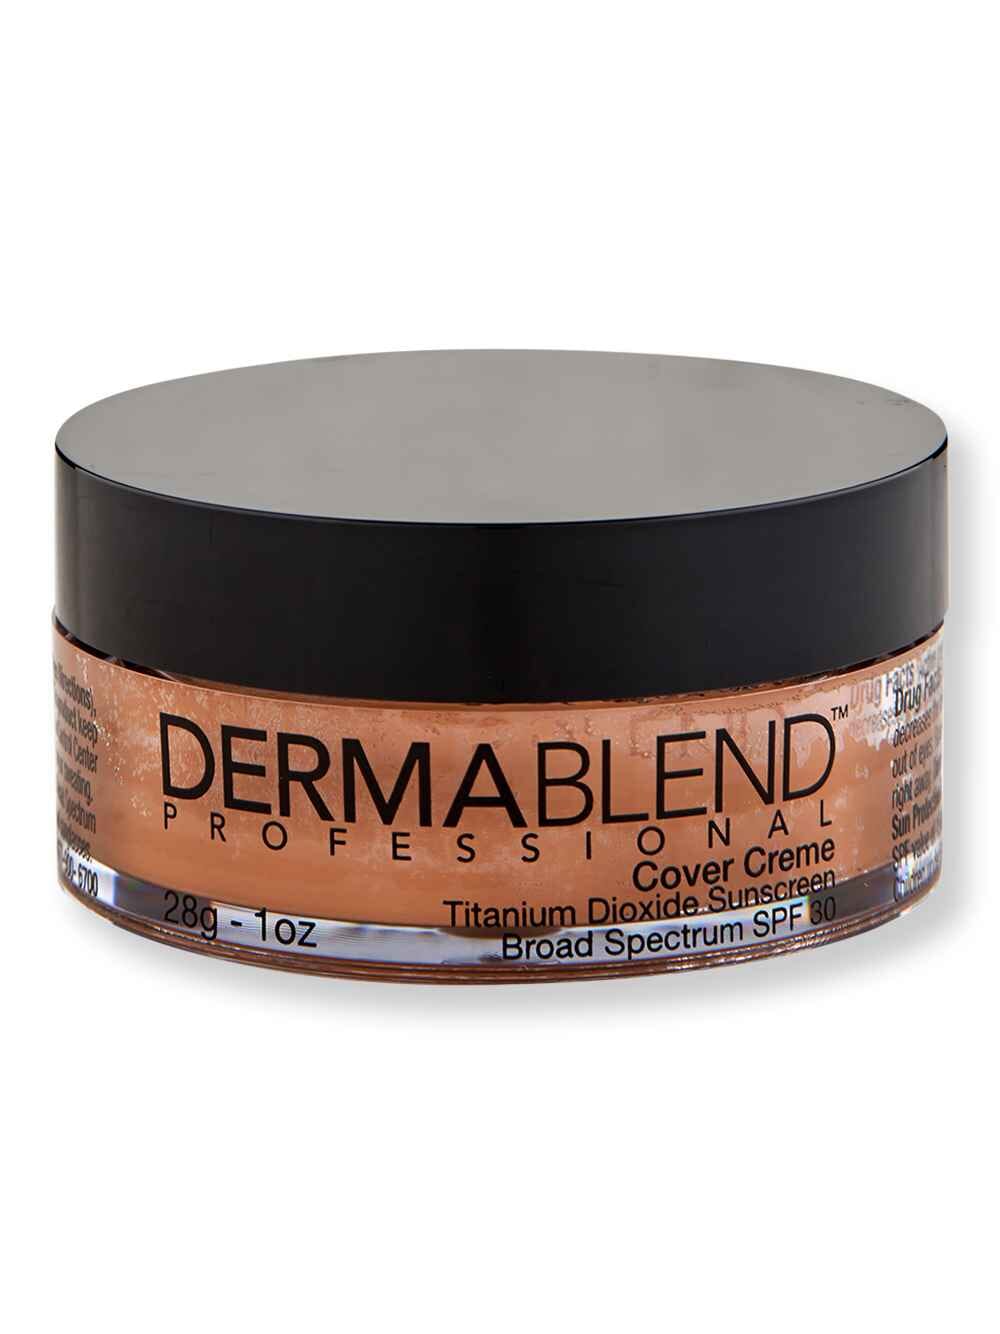 Dermablend Dermablend Cover Creme SPF 30 70W Olive Brown Tinted Moisturizers & Foundations 